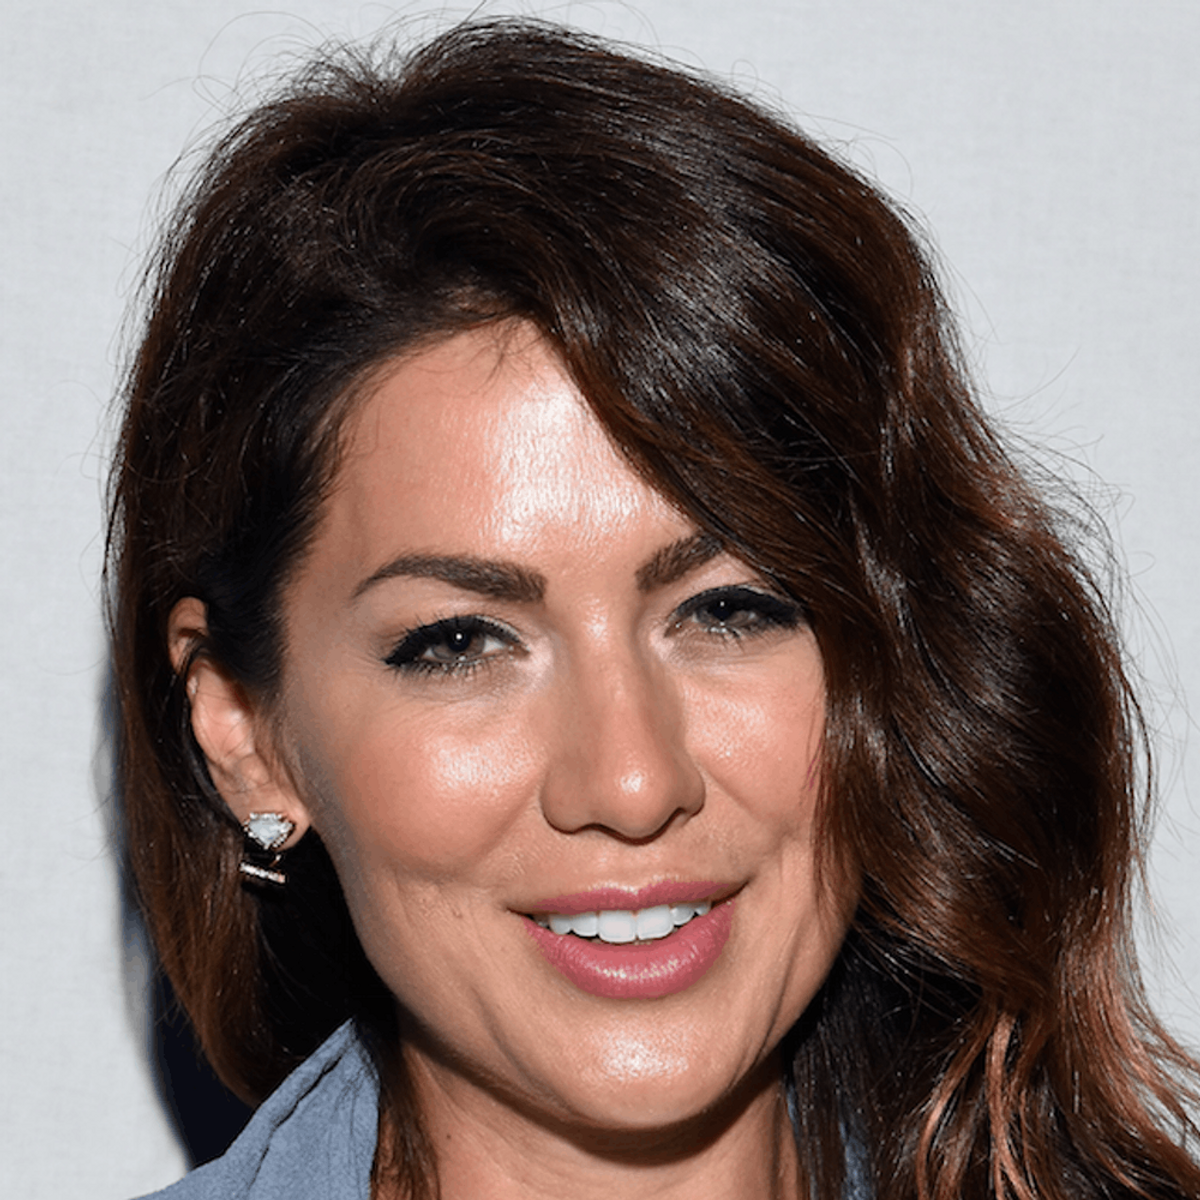 The Bachelorette’s Jillian Harris Is Sharing Her Adorable Engagement Story